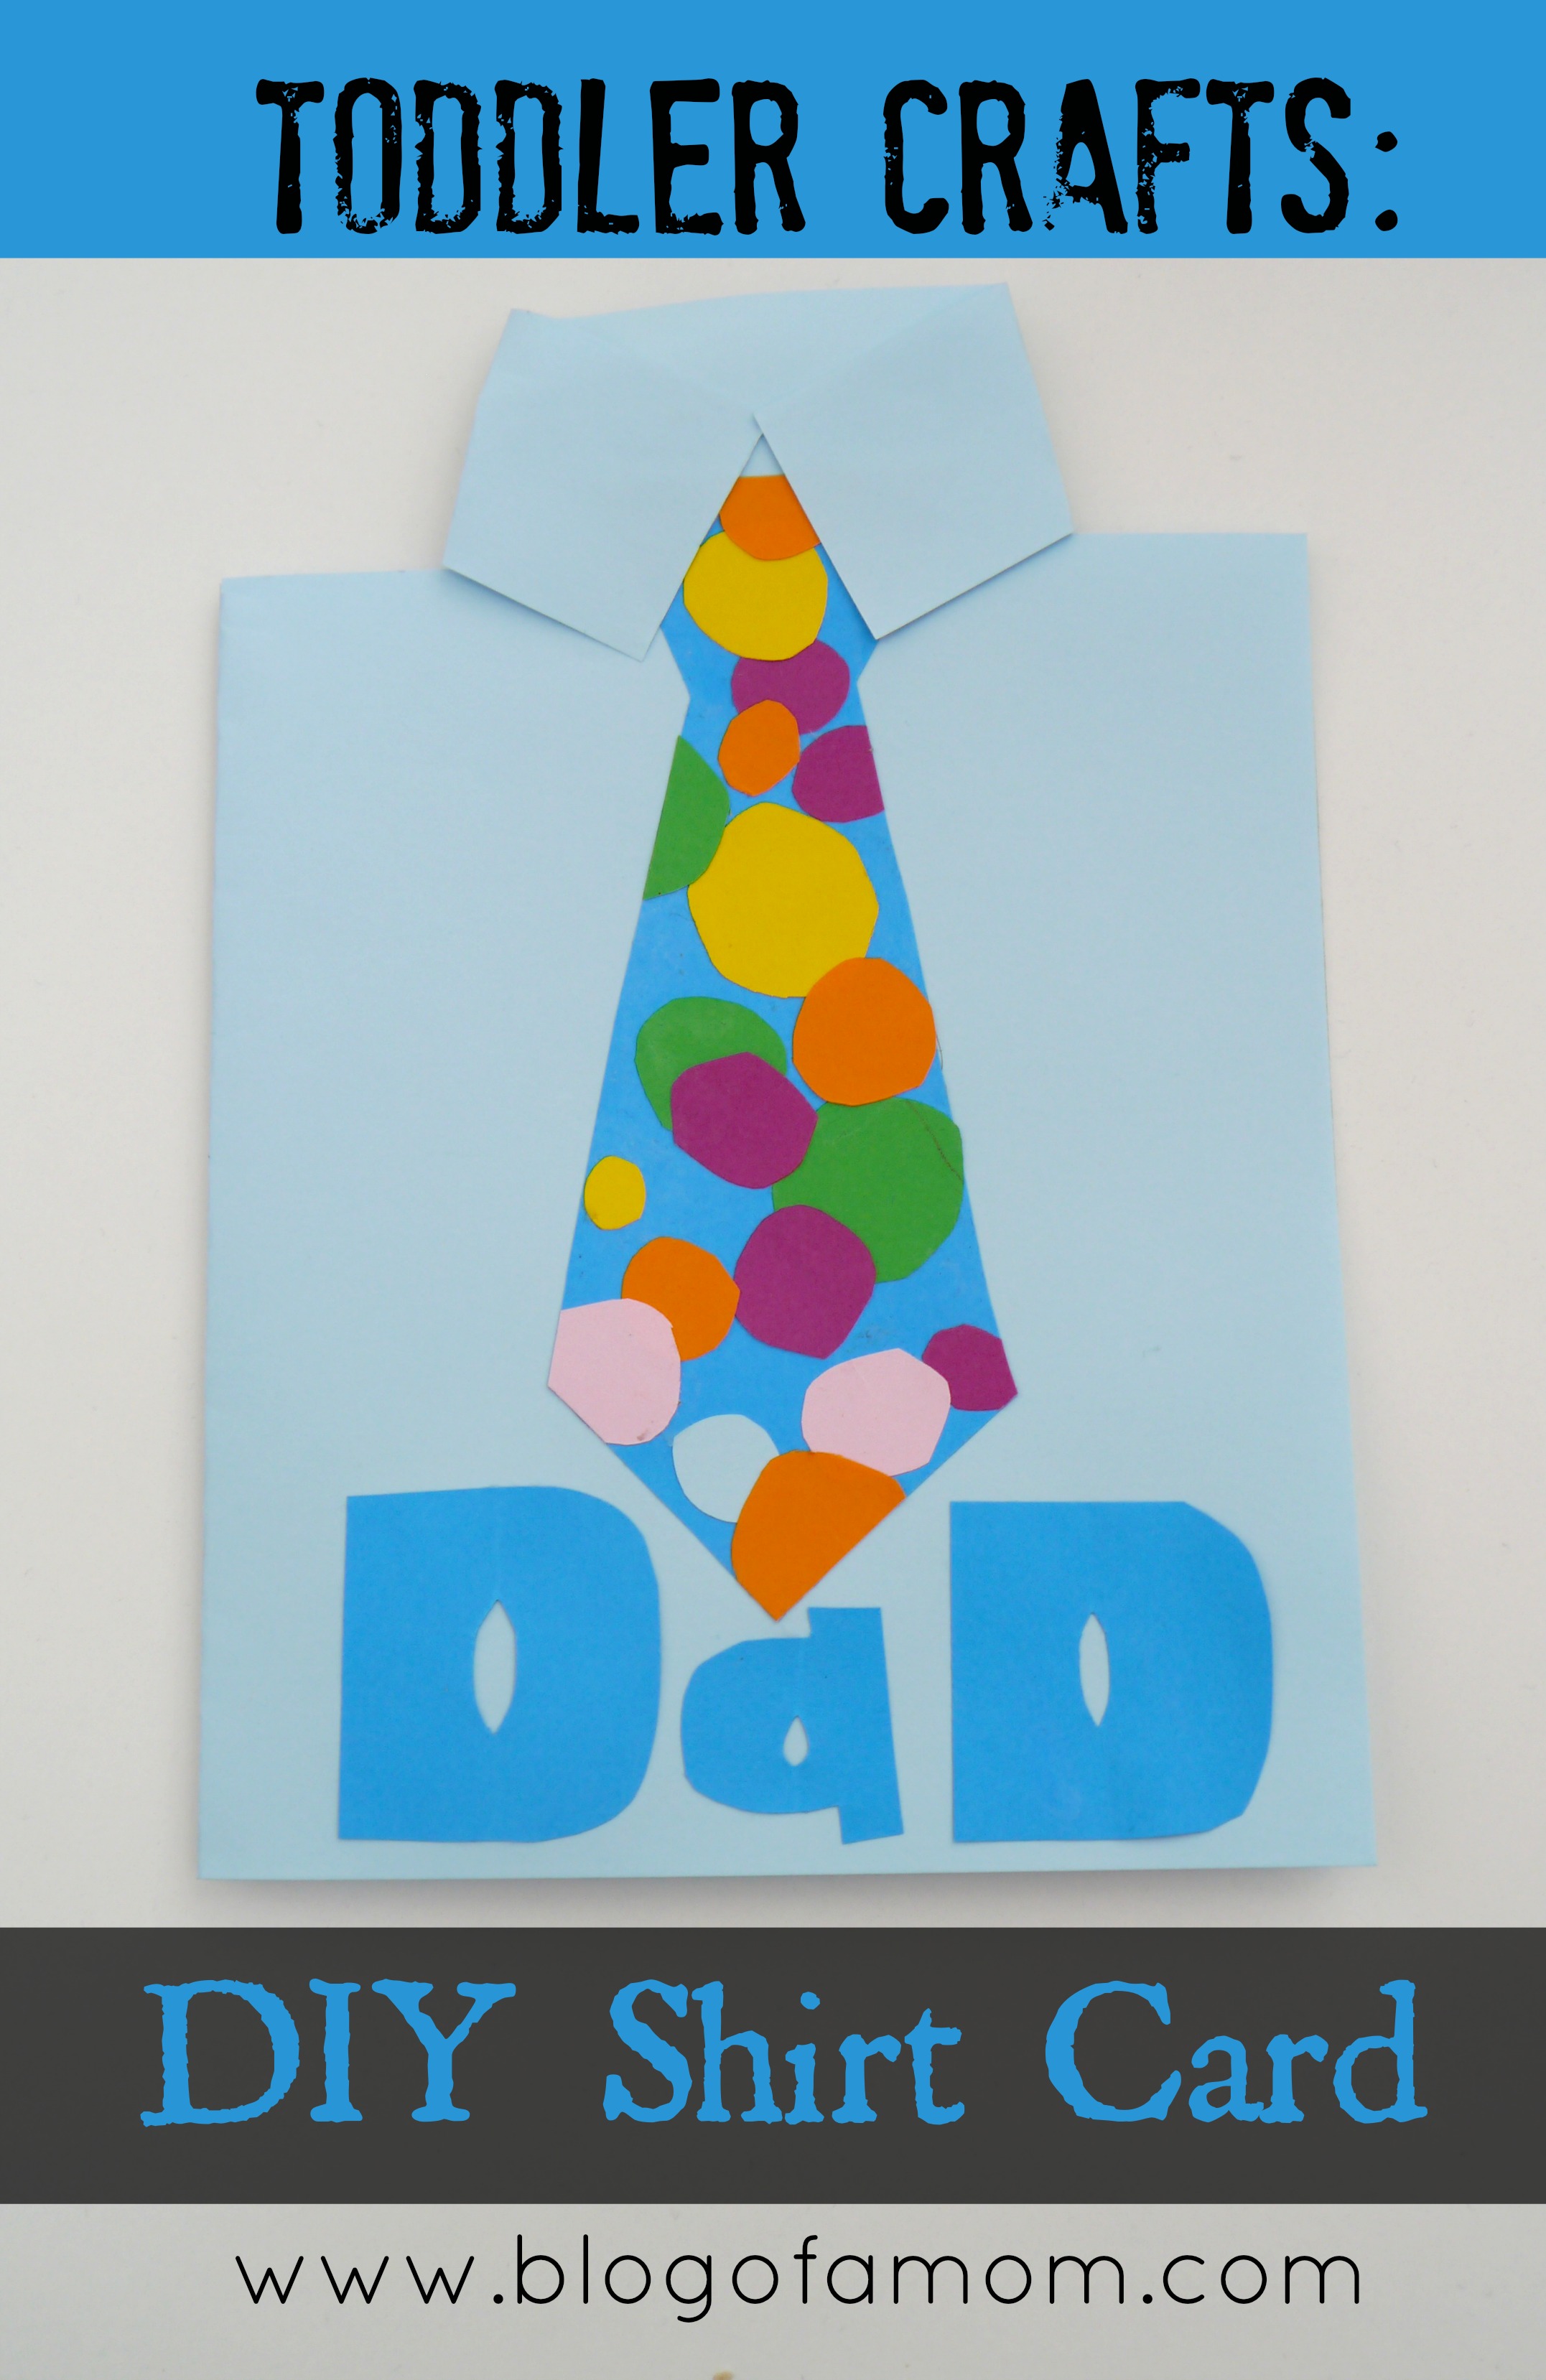 Personalized Father's Day Card Ideas DIY